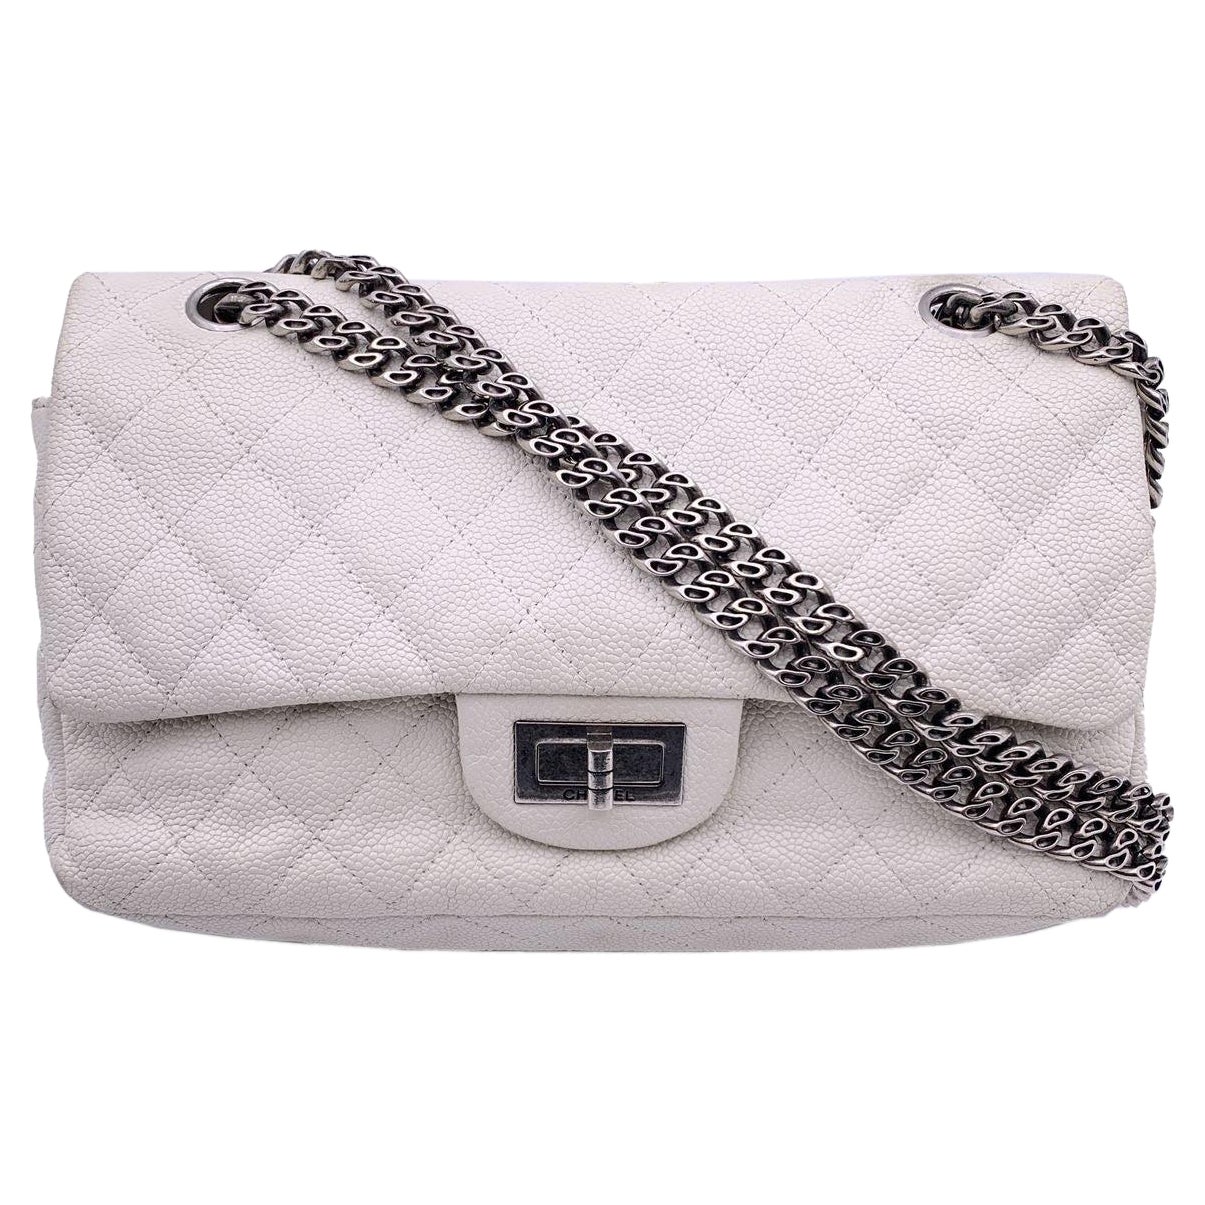 Chanel White Leather Reissue 2.55 Double Flap 225 Shoulder Bag 2000s For Sale